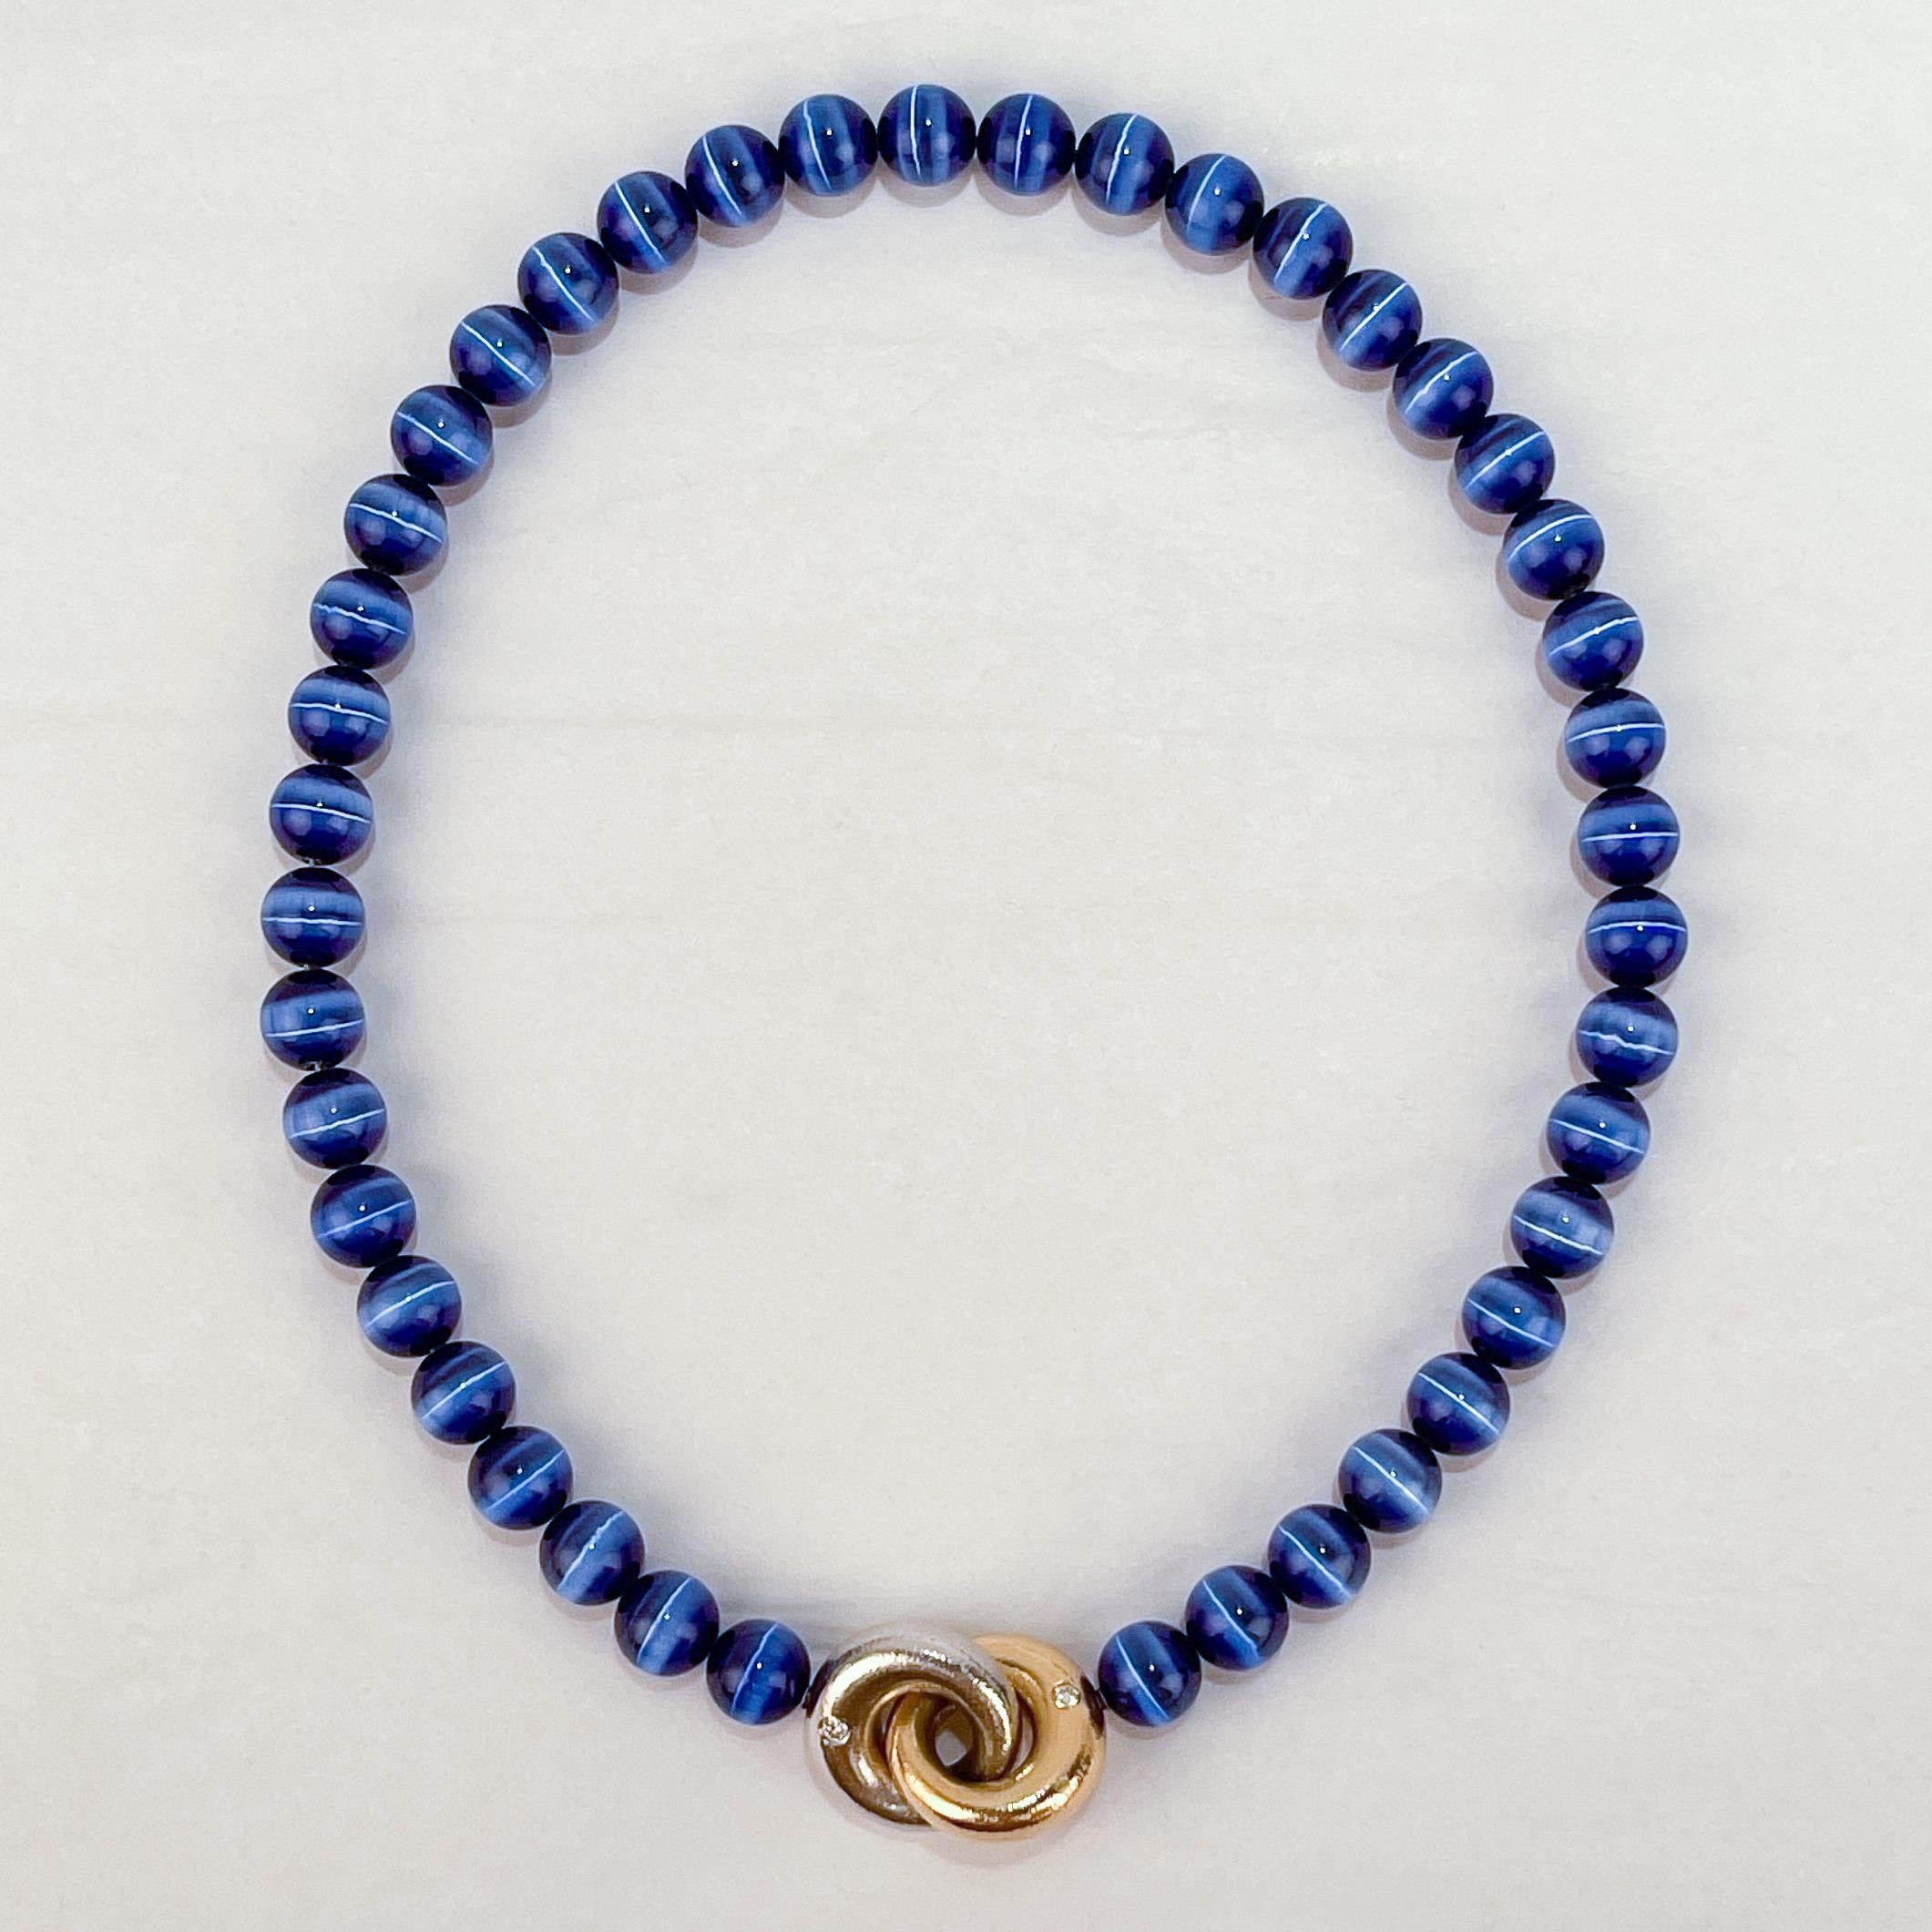 Ole Lynggaard 14k Gold & Blue Tiger's Eye Beaded Collier or Choker Necklace For Sale 8